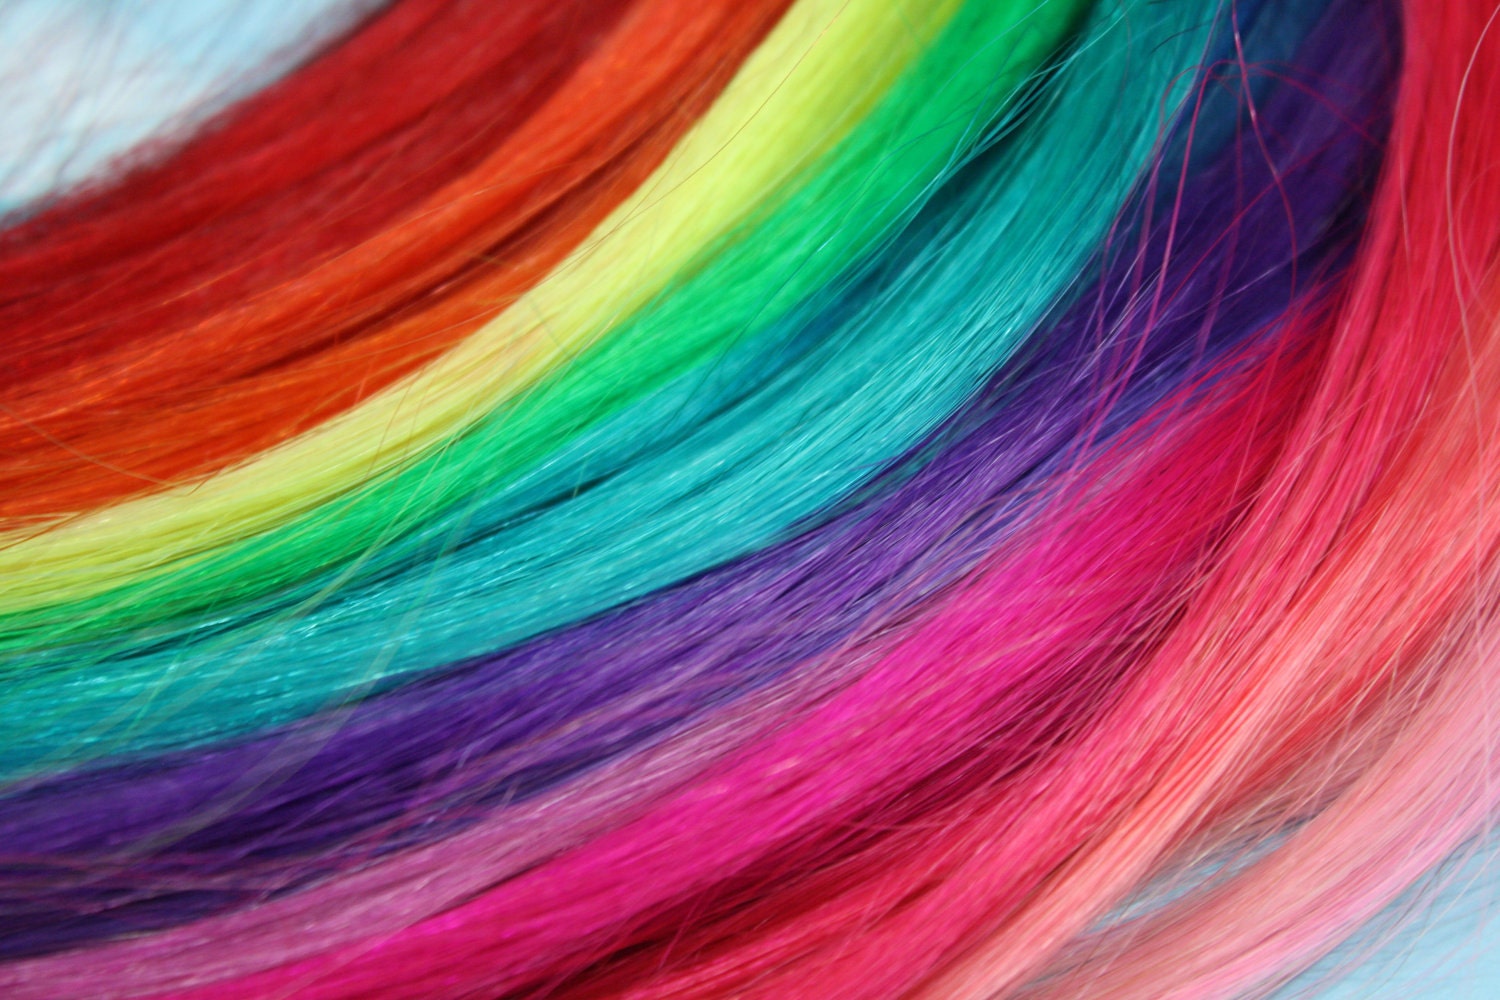 Rainbow Human Hair Extensions Colored Hair Extension Clip Coloring Wallpapers Download Free Images Wallpaper [coloring654.blogspot.com]